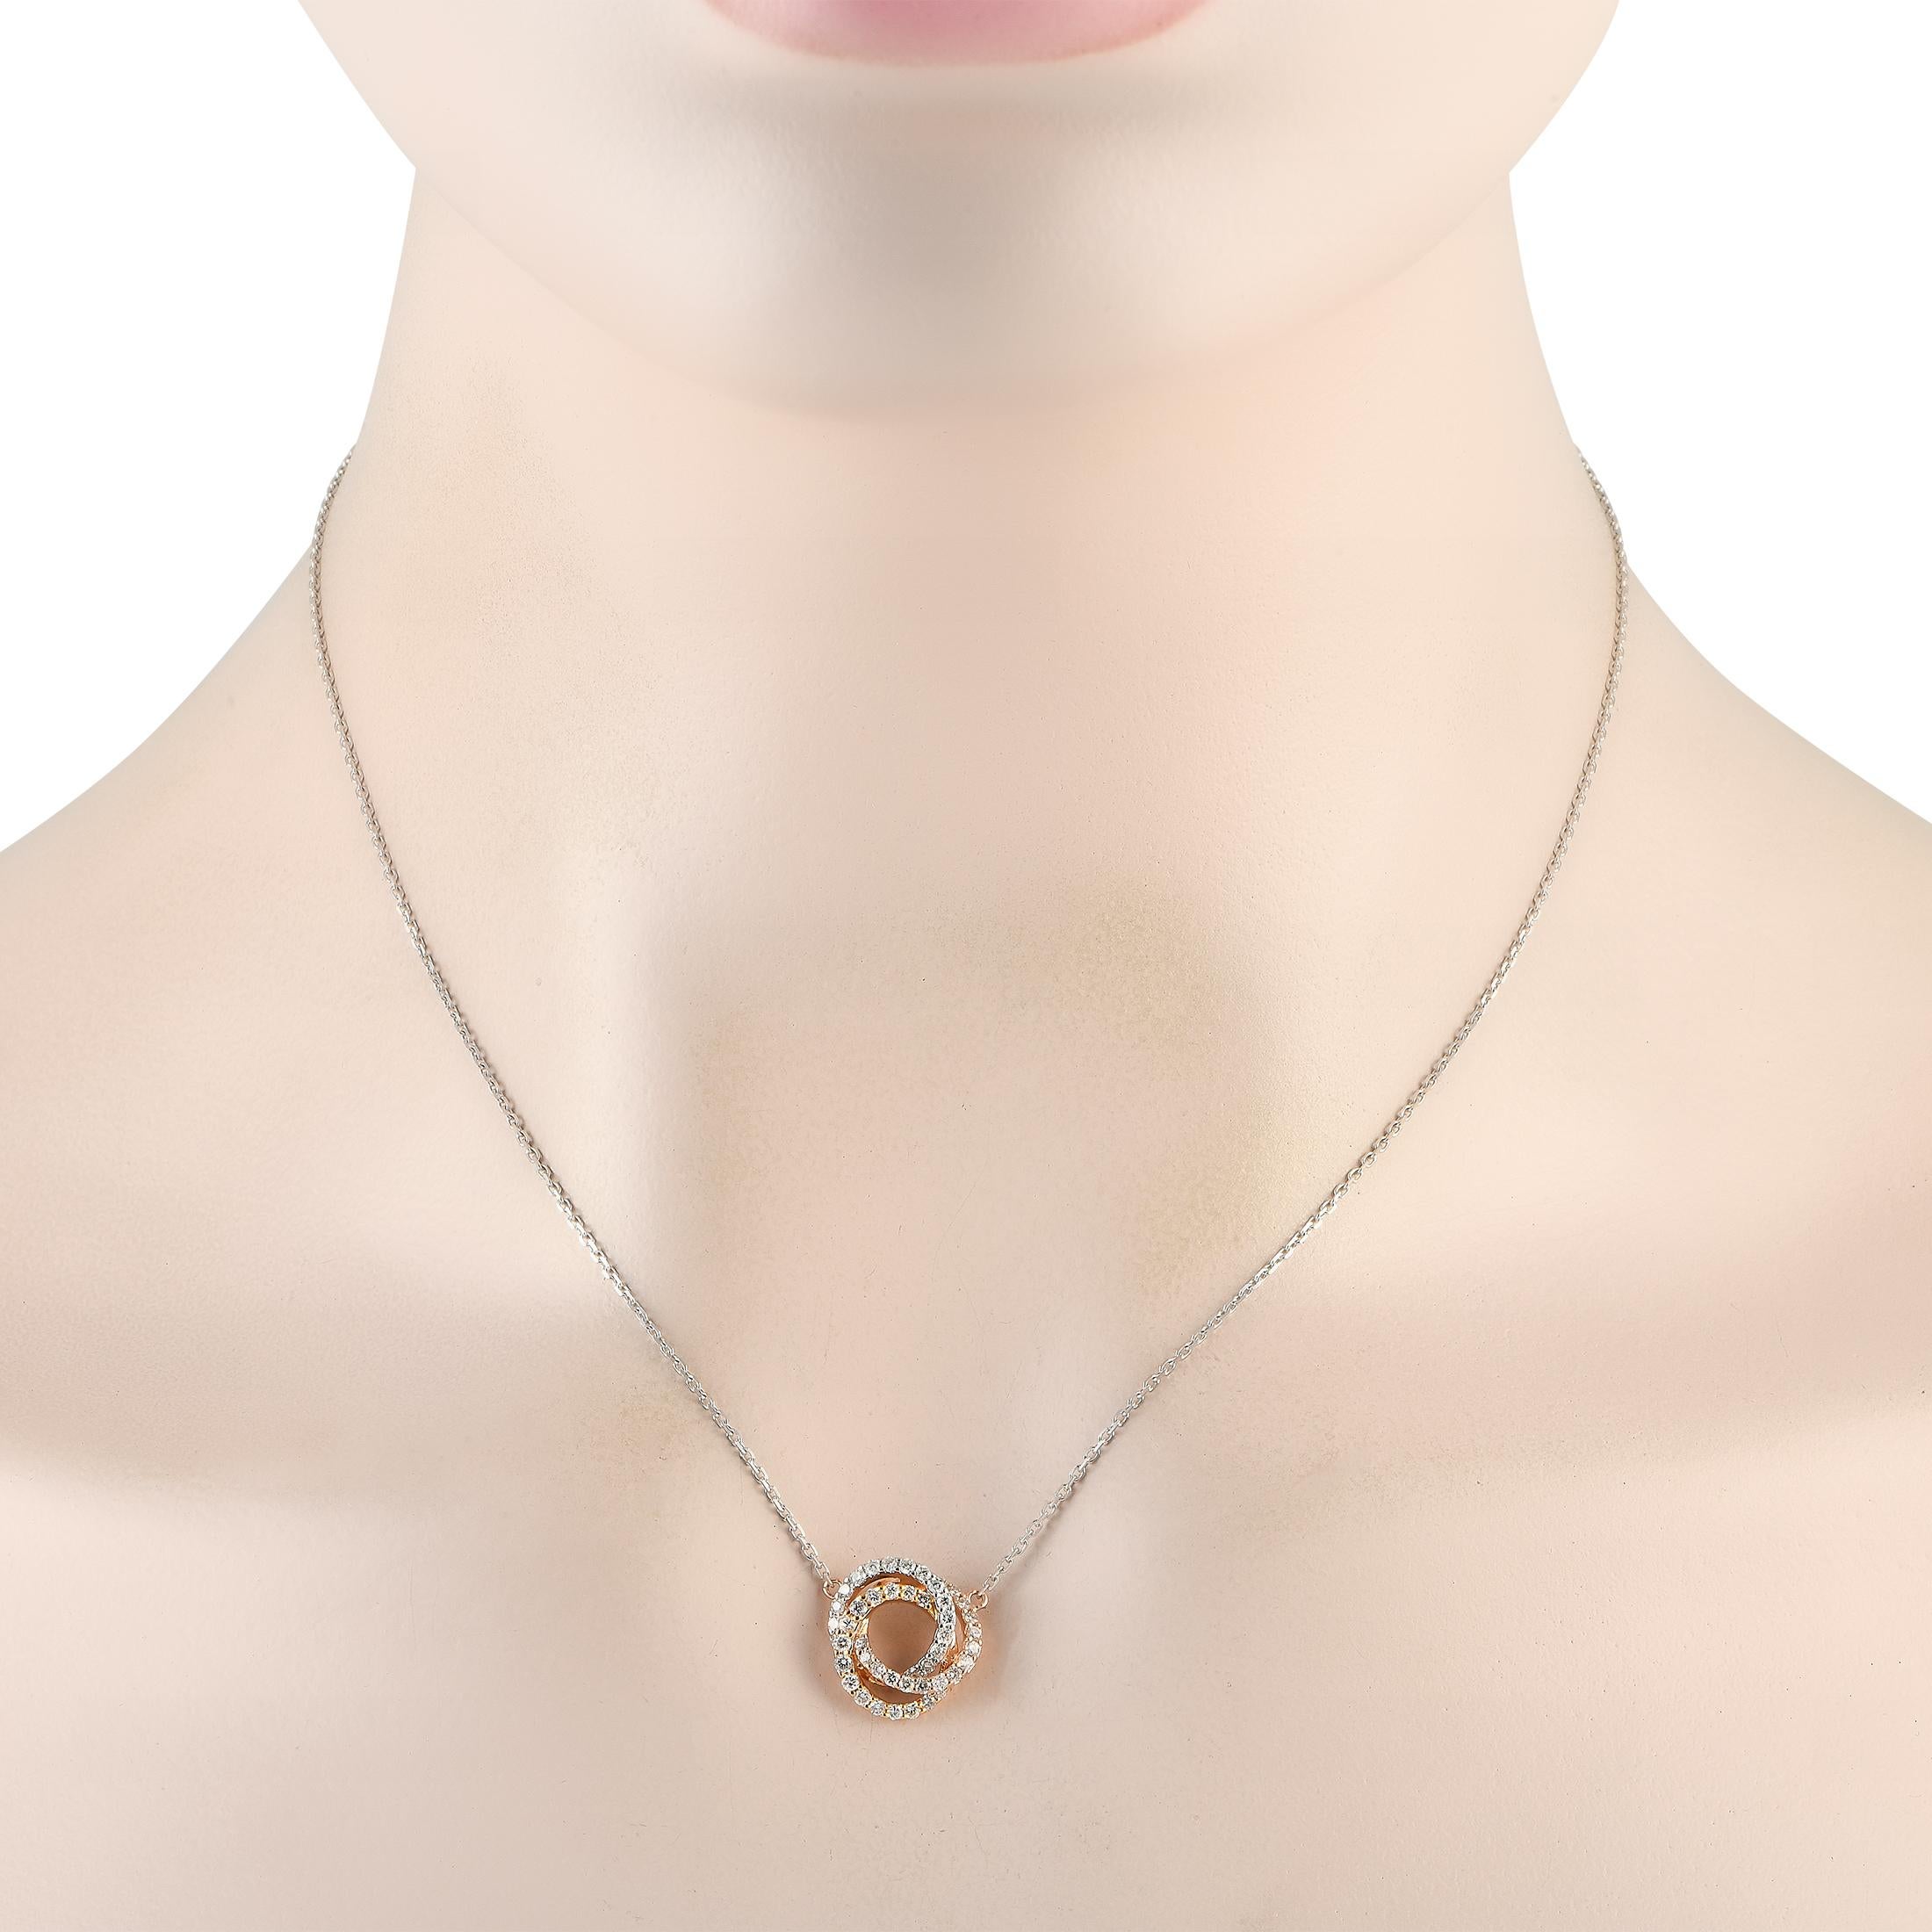 An instant stand-out, this necklace can add a sophisticated flair to your wardrobe. It is made from 18K white and rose gold and has three interlocking rings for its pendant. Each ring is outlined with round diamonds for a captivating sparkle.Offered